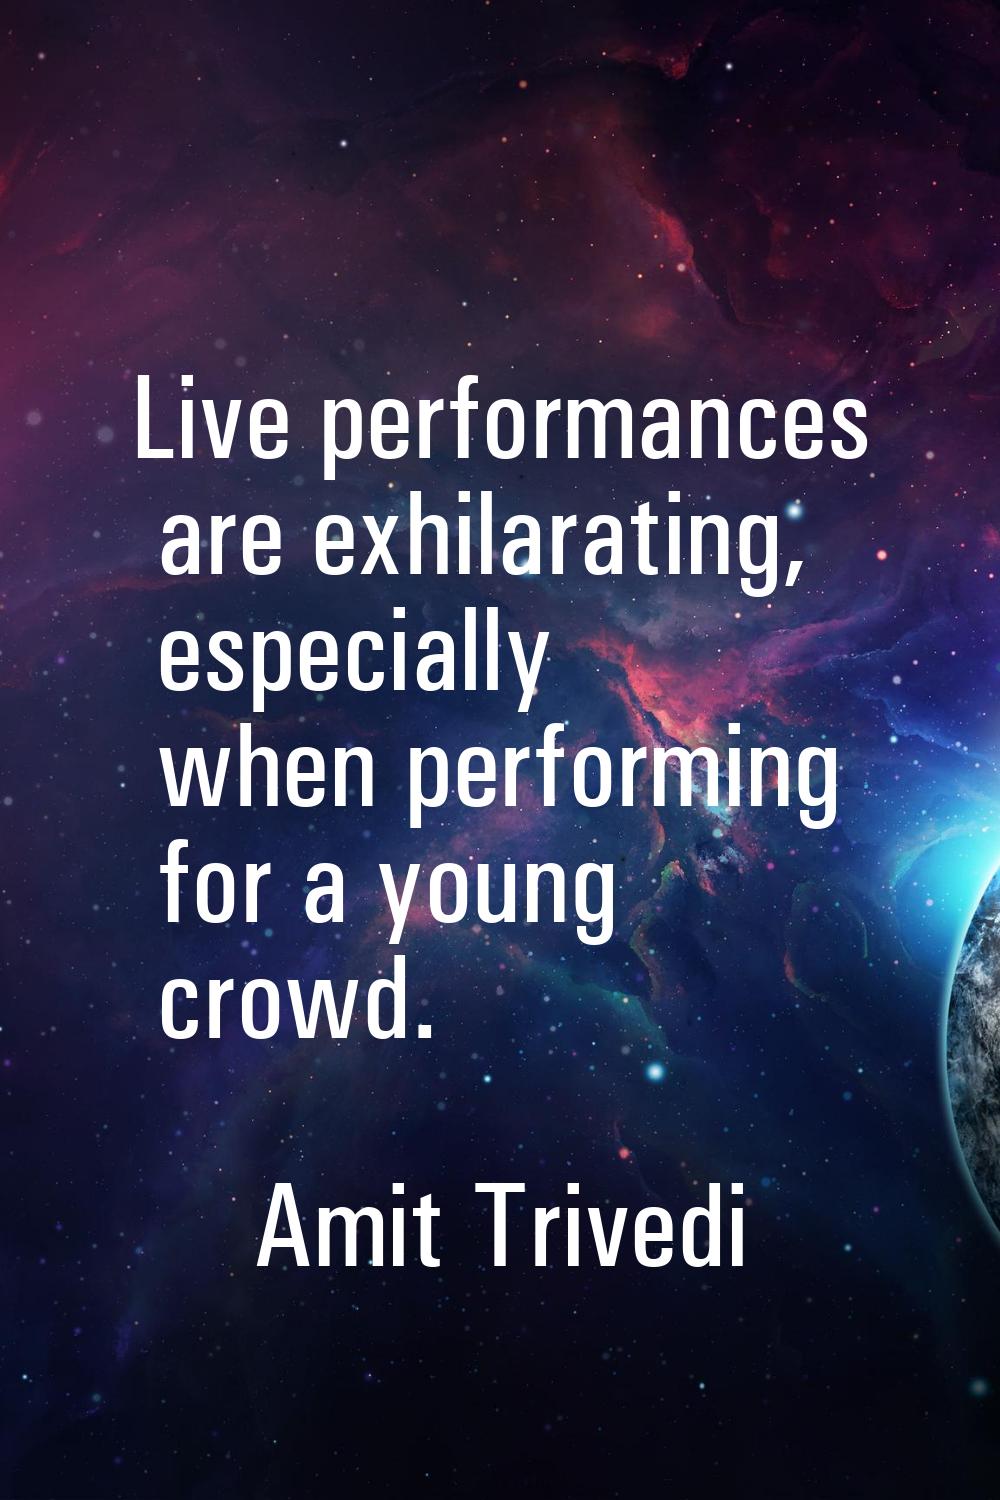 Live performances are exhilarating, especially when performing for a young crowd.